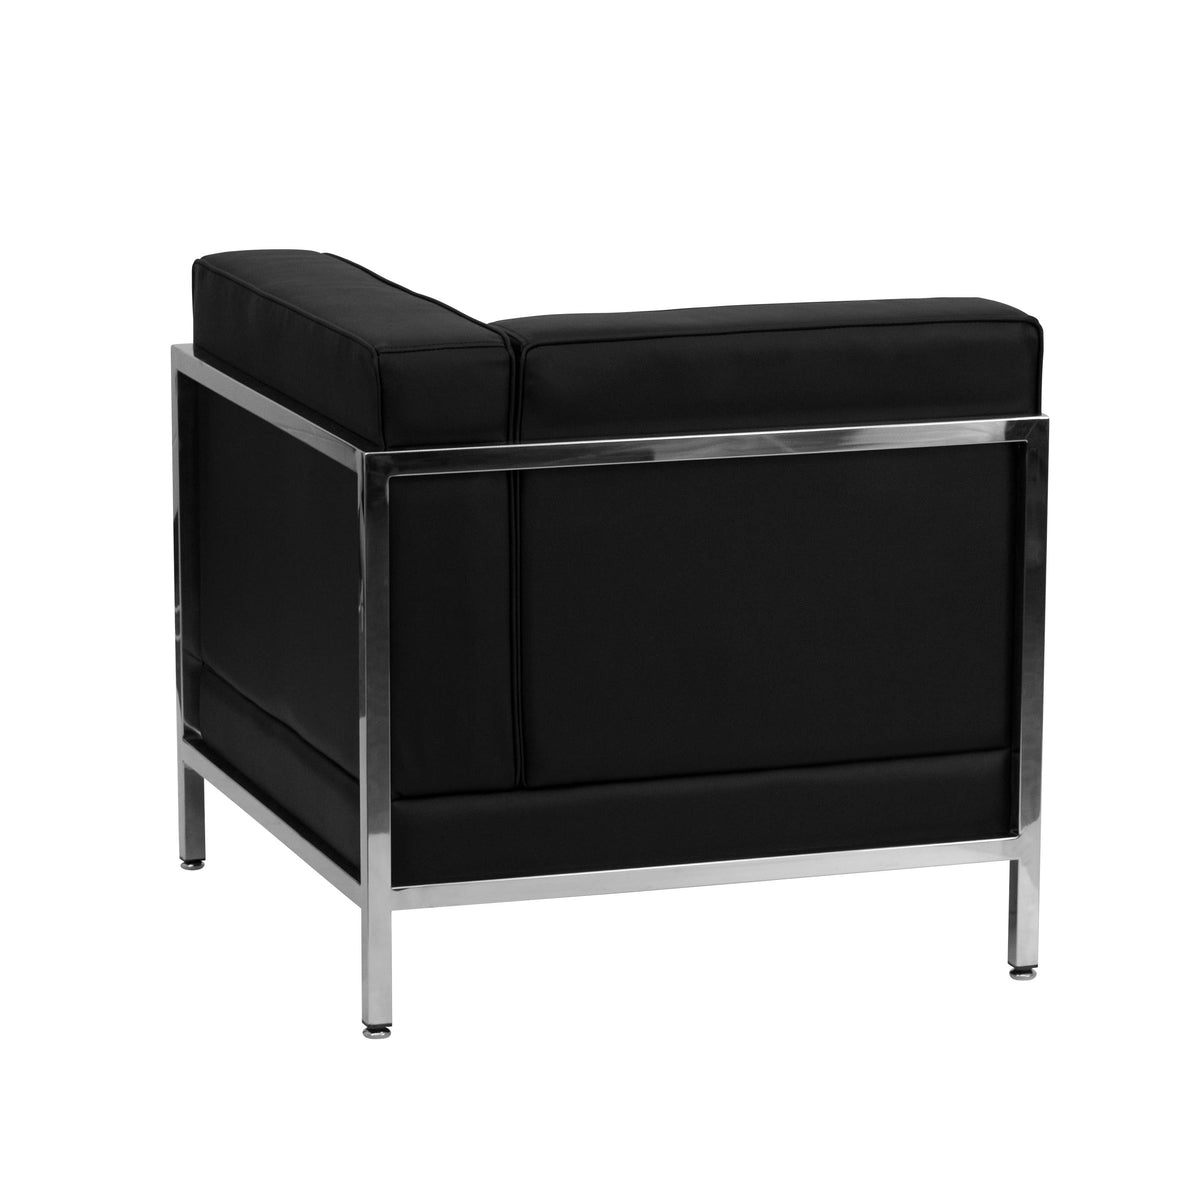 Black |#| Black LeatherSoft Modular Right Corner Chair with Quilted Tufted Seat